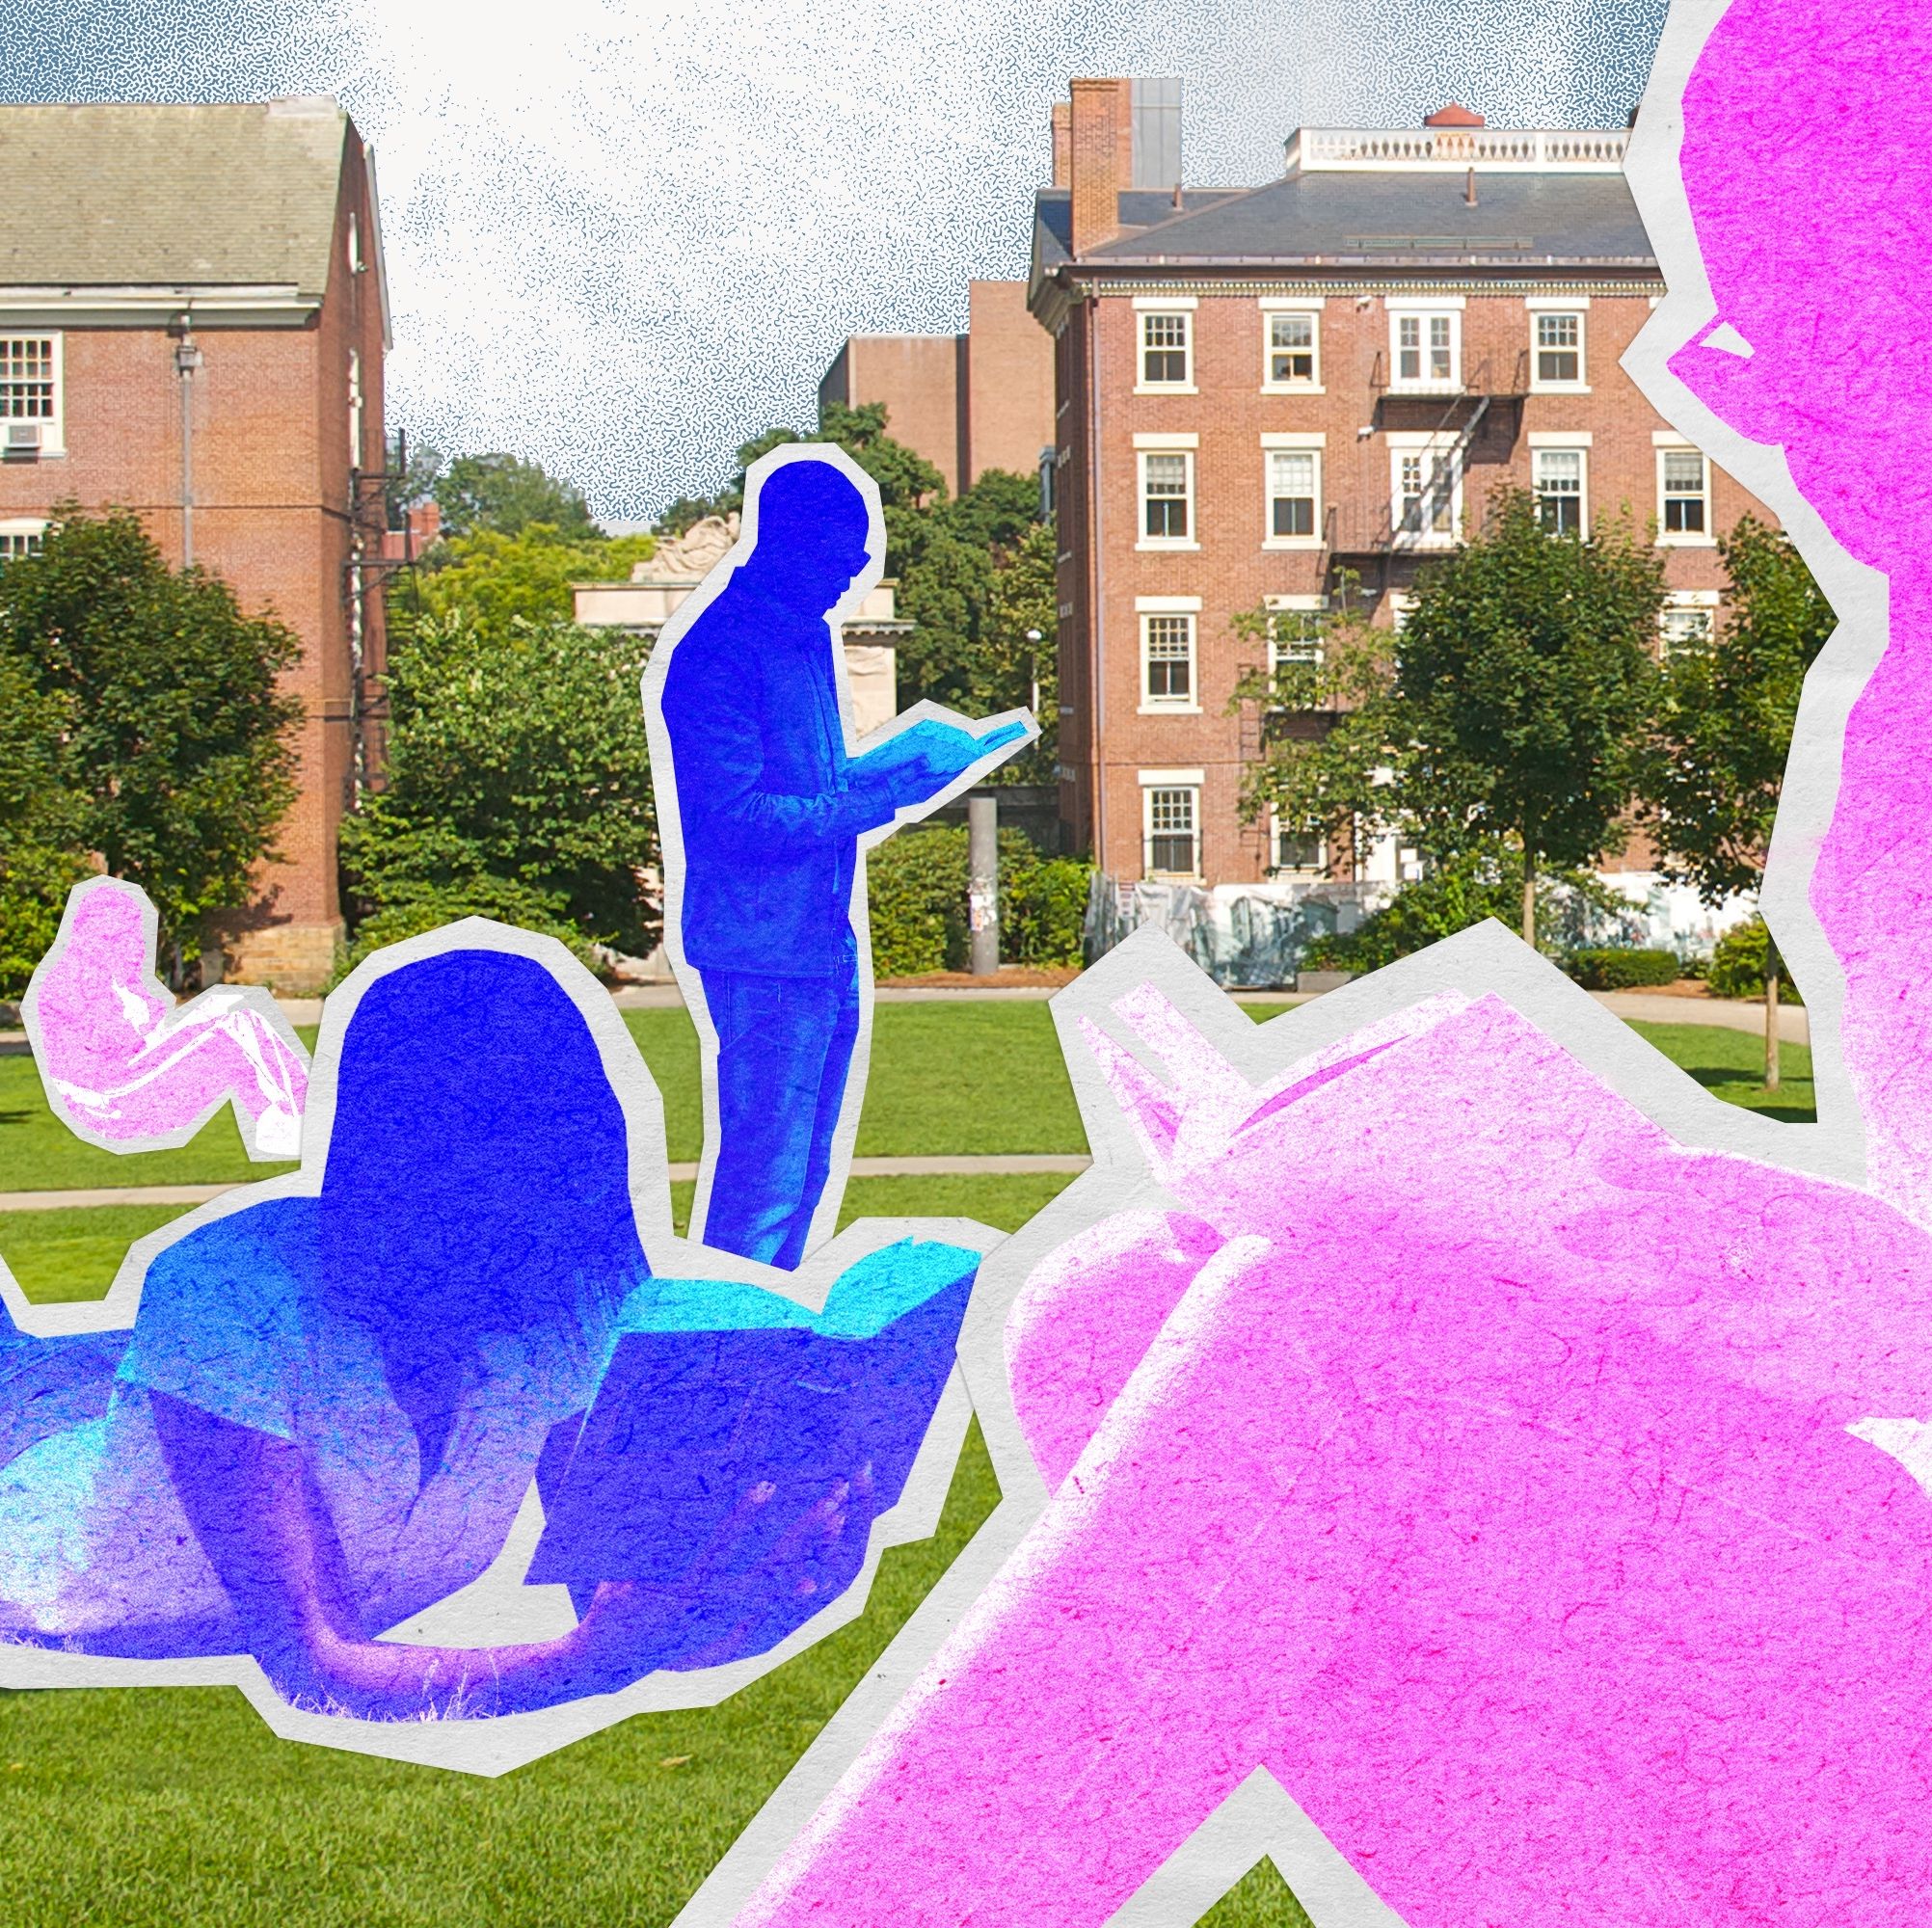 Is the Campus Novel Dead?